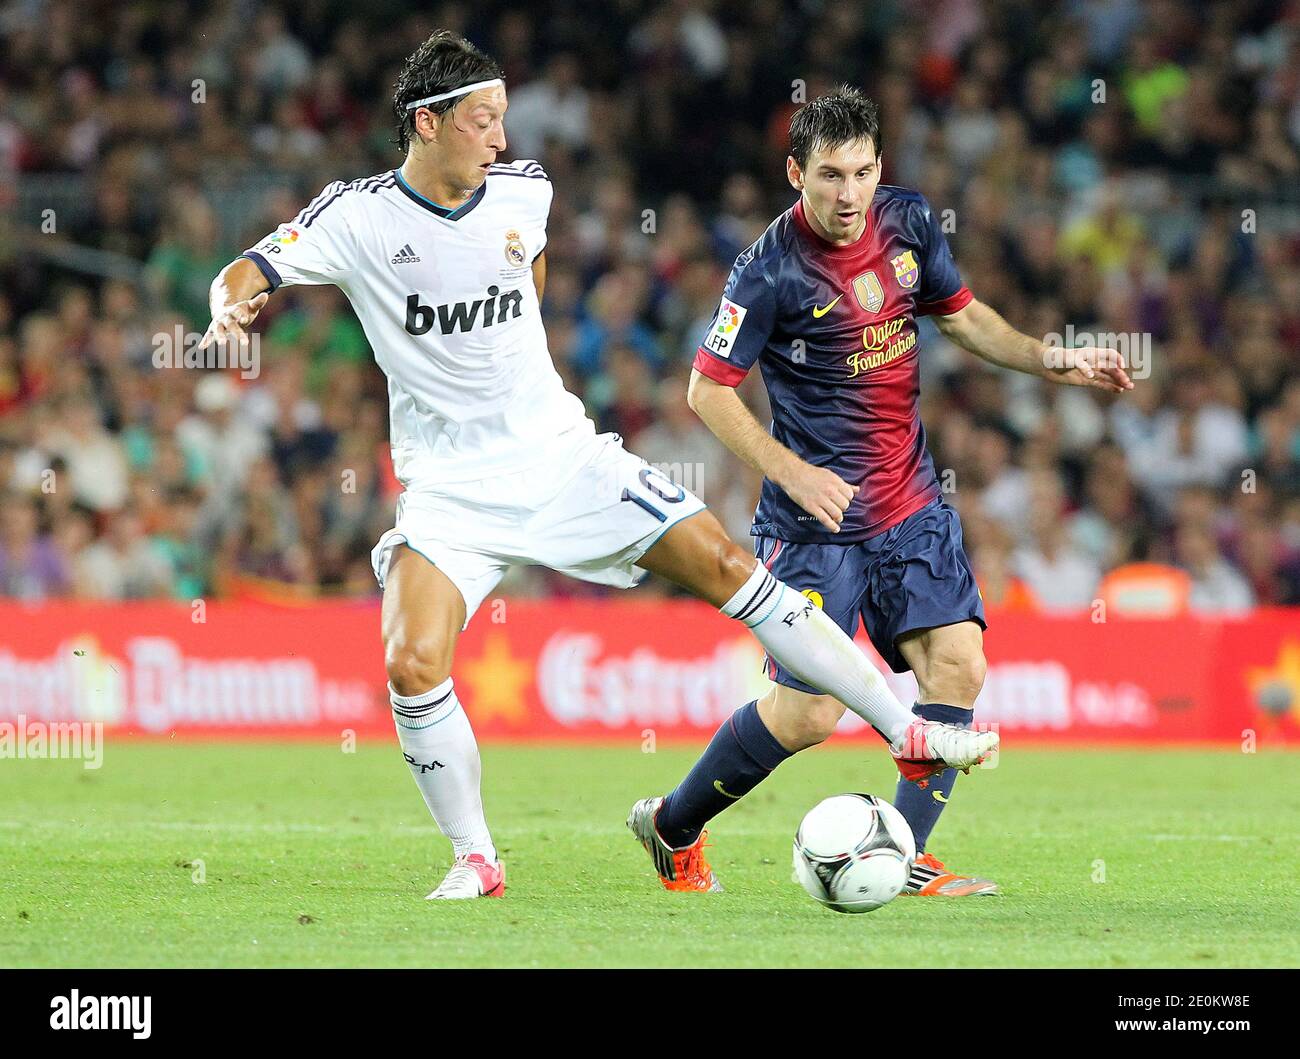 Real Madrid's Mesut Ozil and Barlona's Lionel Messi during the Spanish Supercup first-leg football match FC Barcelona Vs Real Madrid CF at the Camp Nou stadium in Barcelona, Spain on August 23, 2012. Photo by Giuliano  Bevilacqua/ABACAPRESS.COM Stock Photo